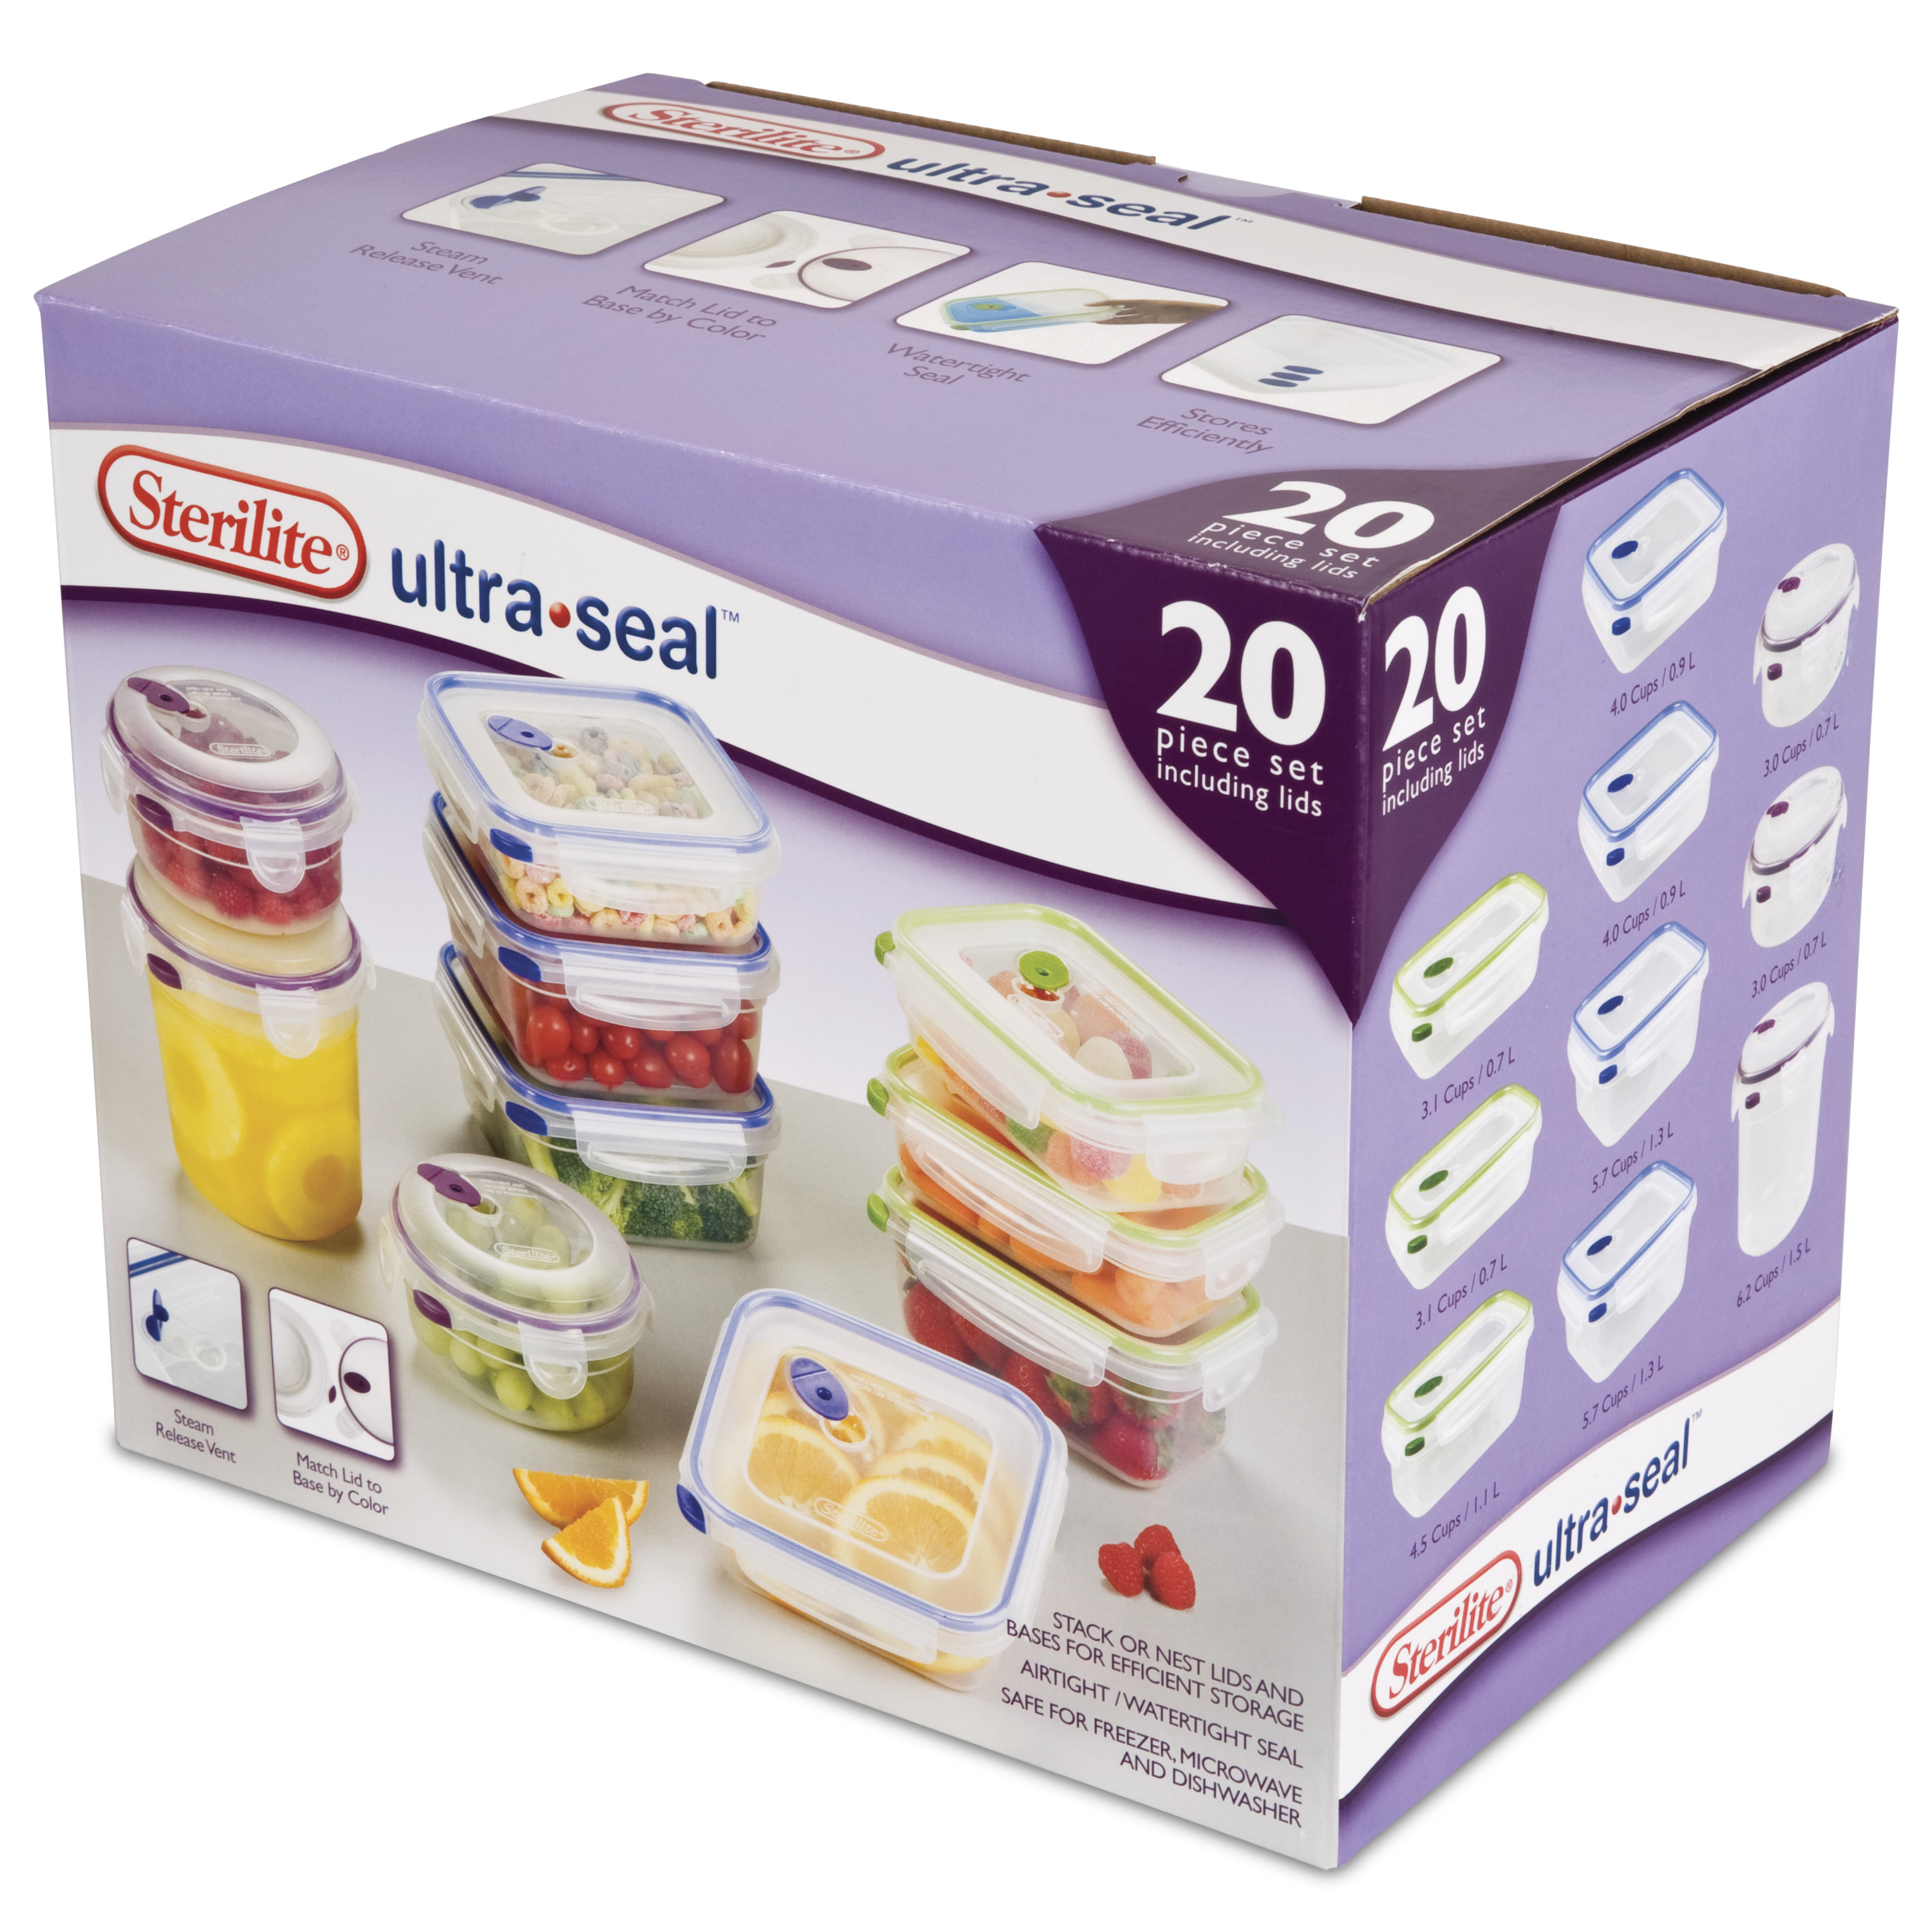 Sterilite, Ultra•Seal™ 20 Piece Set, Clear - image 1 of 7